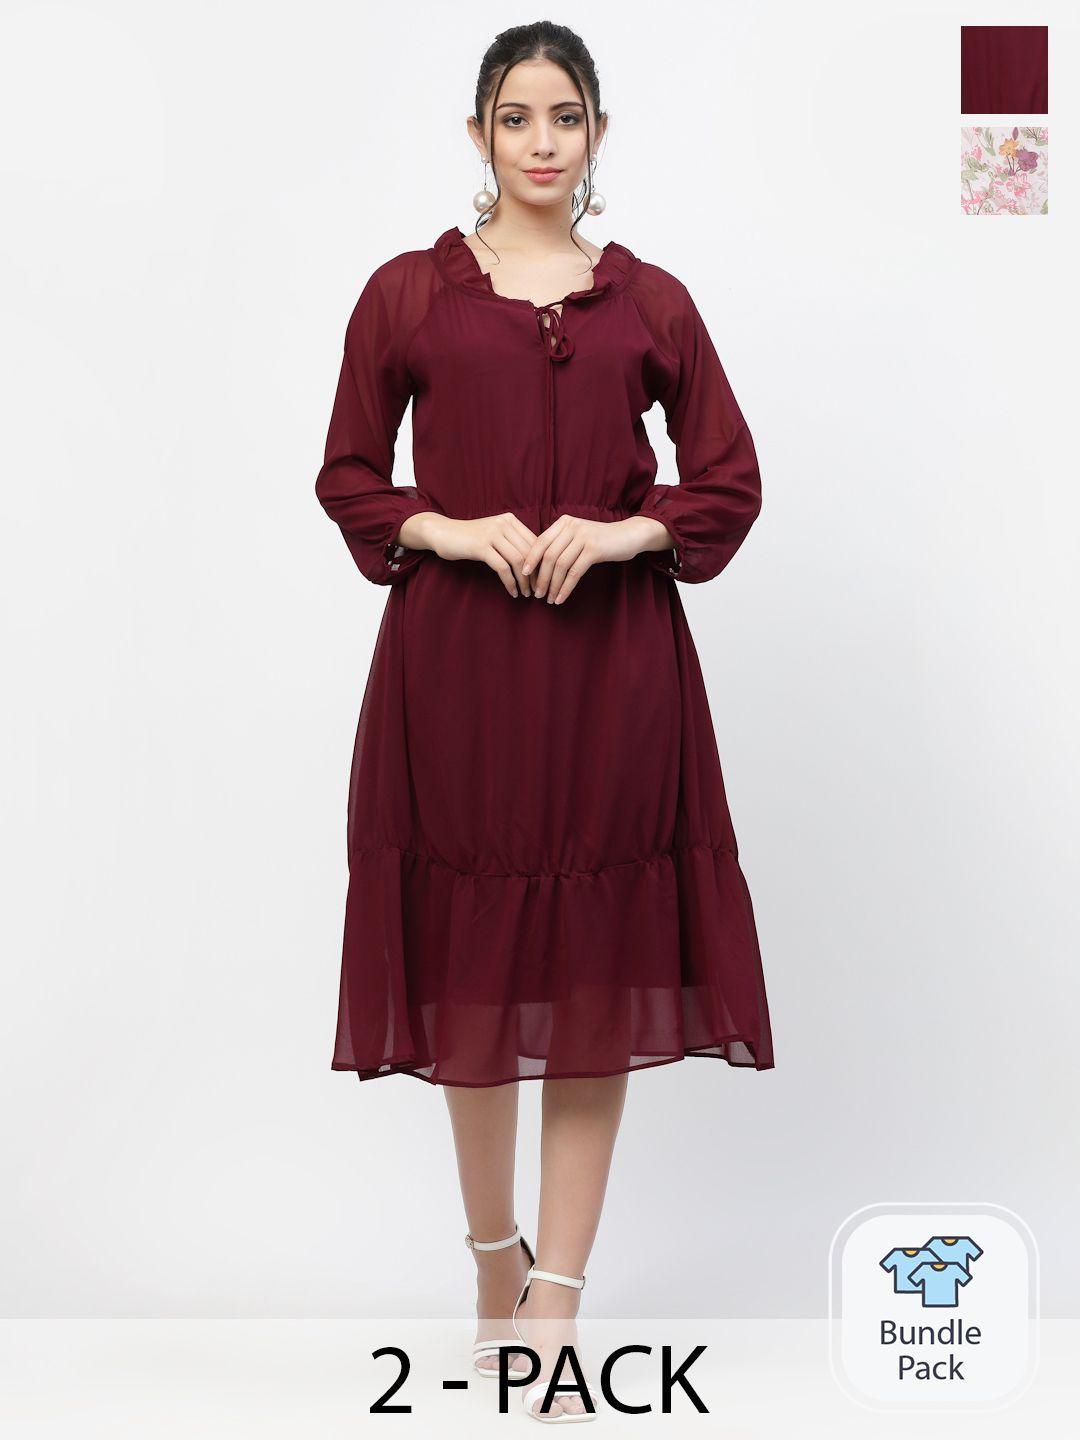 miss-ayse-pack-of-2-maroon-&-white-fit-&-flare-dresses